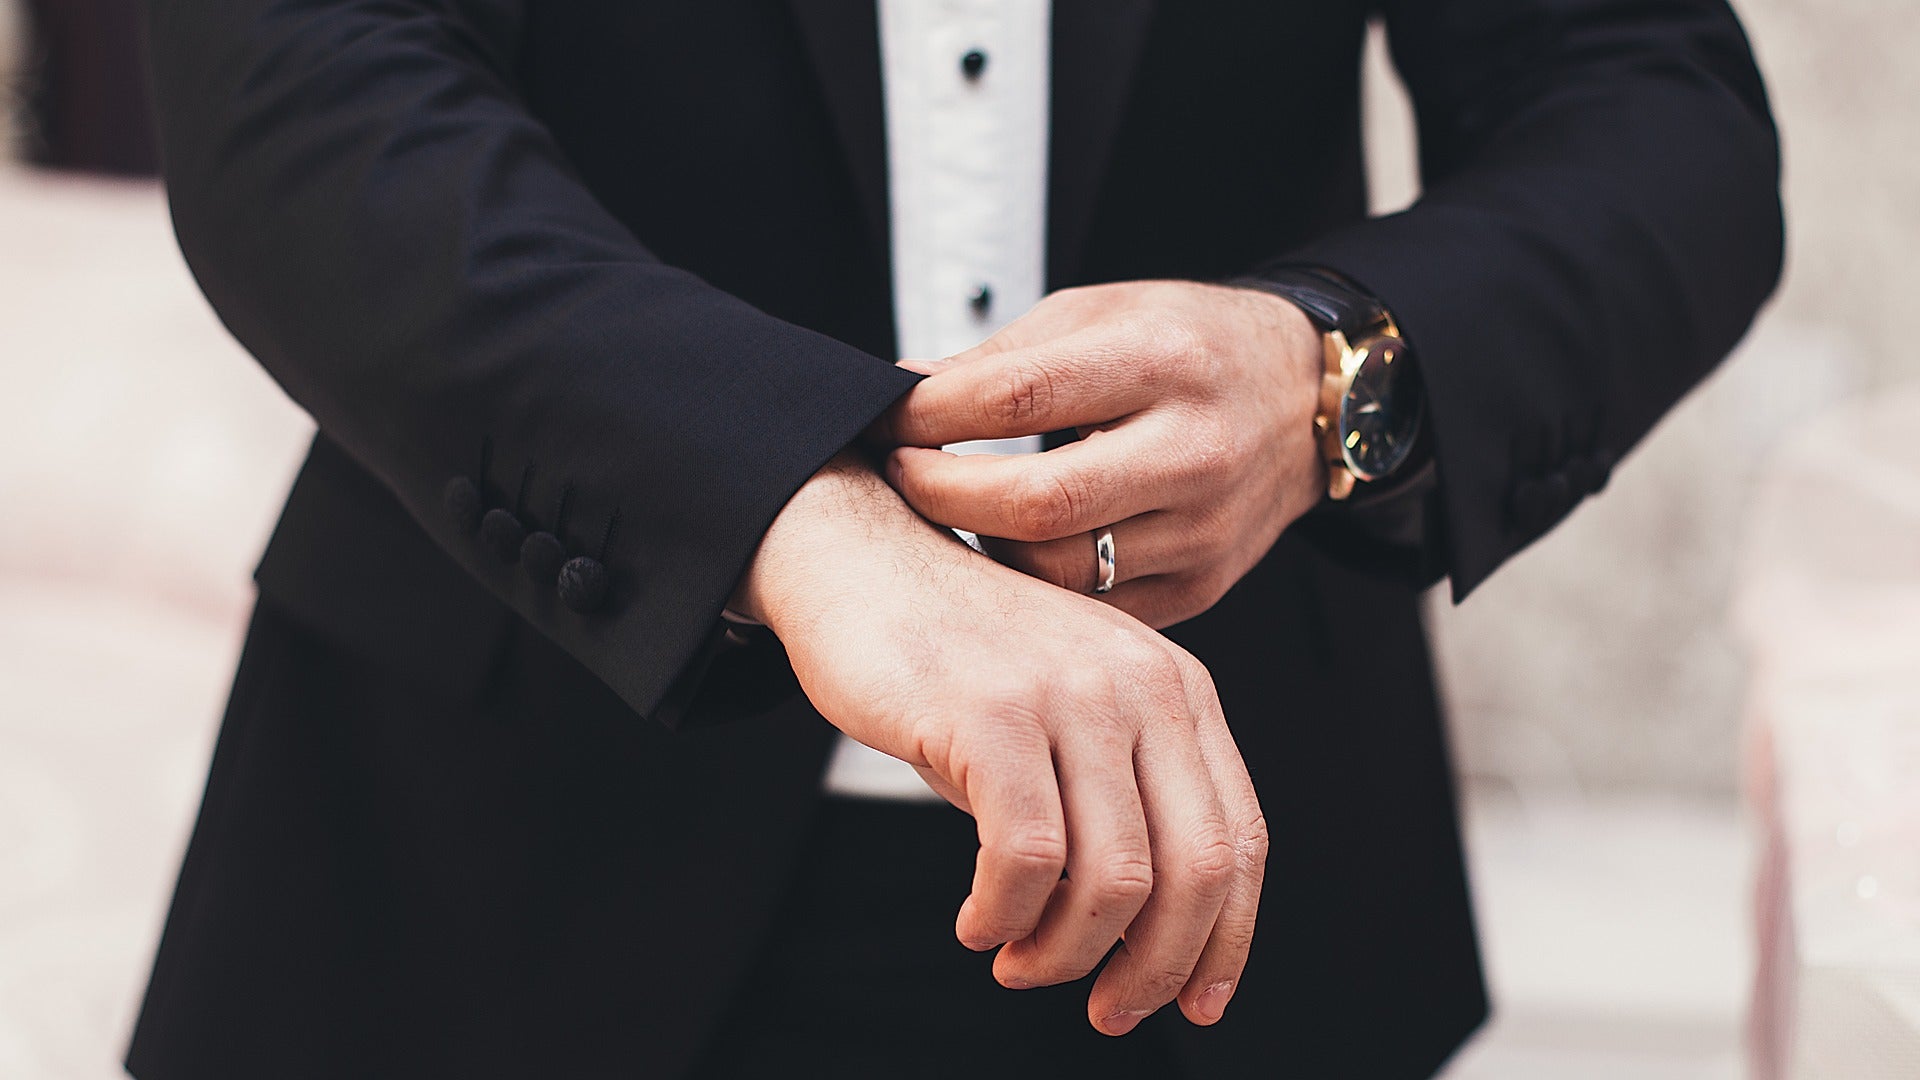 Fall Weddings - Suits, Tuxedos, And Watches